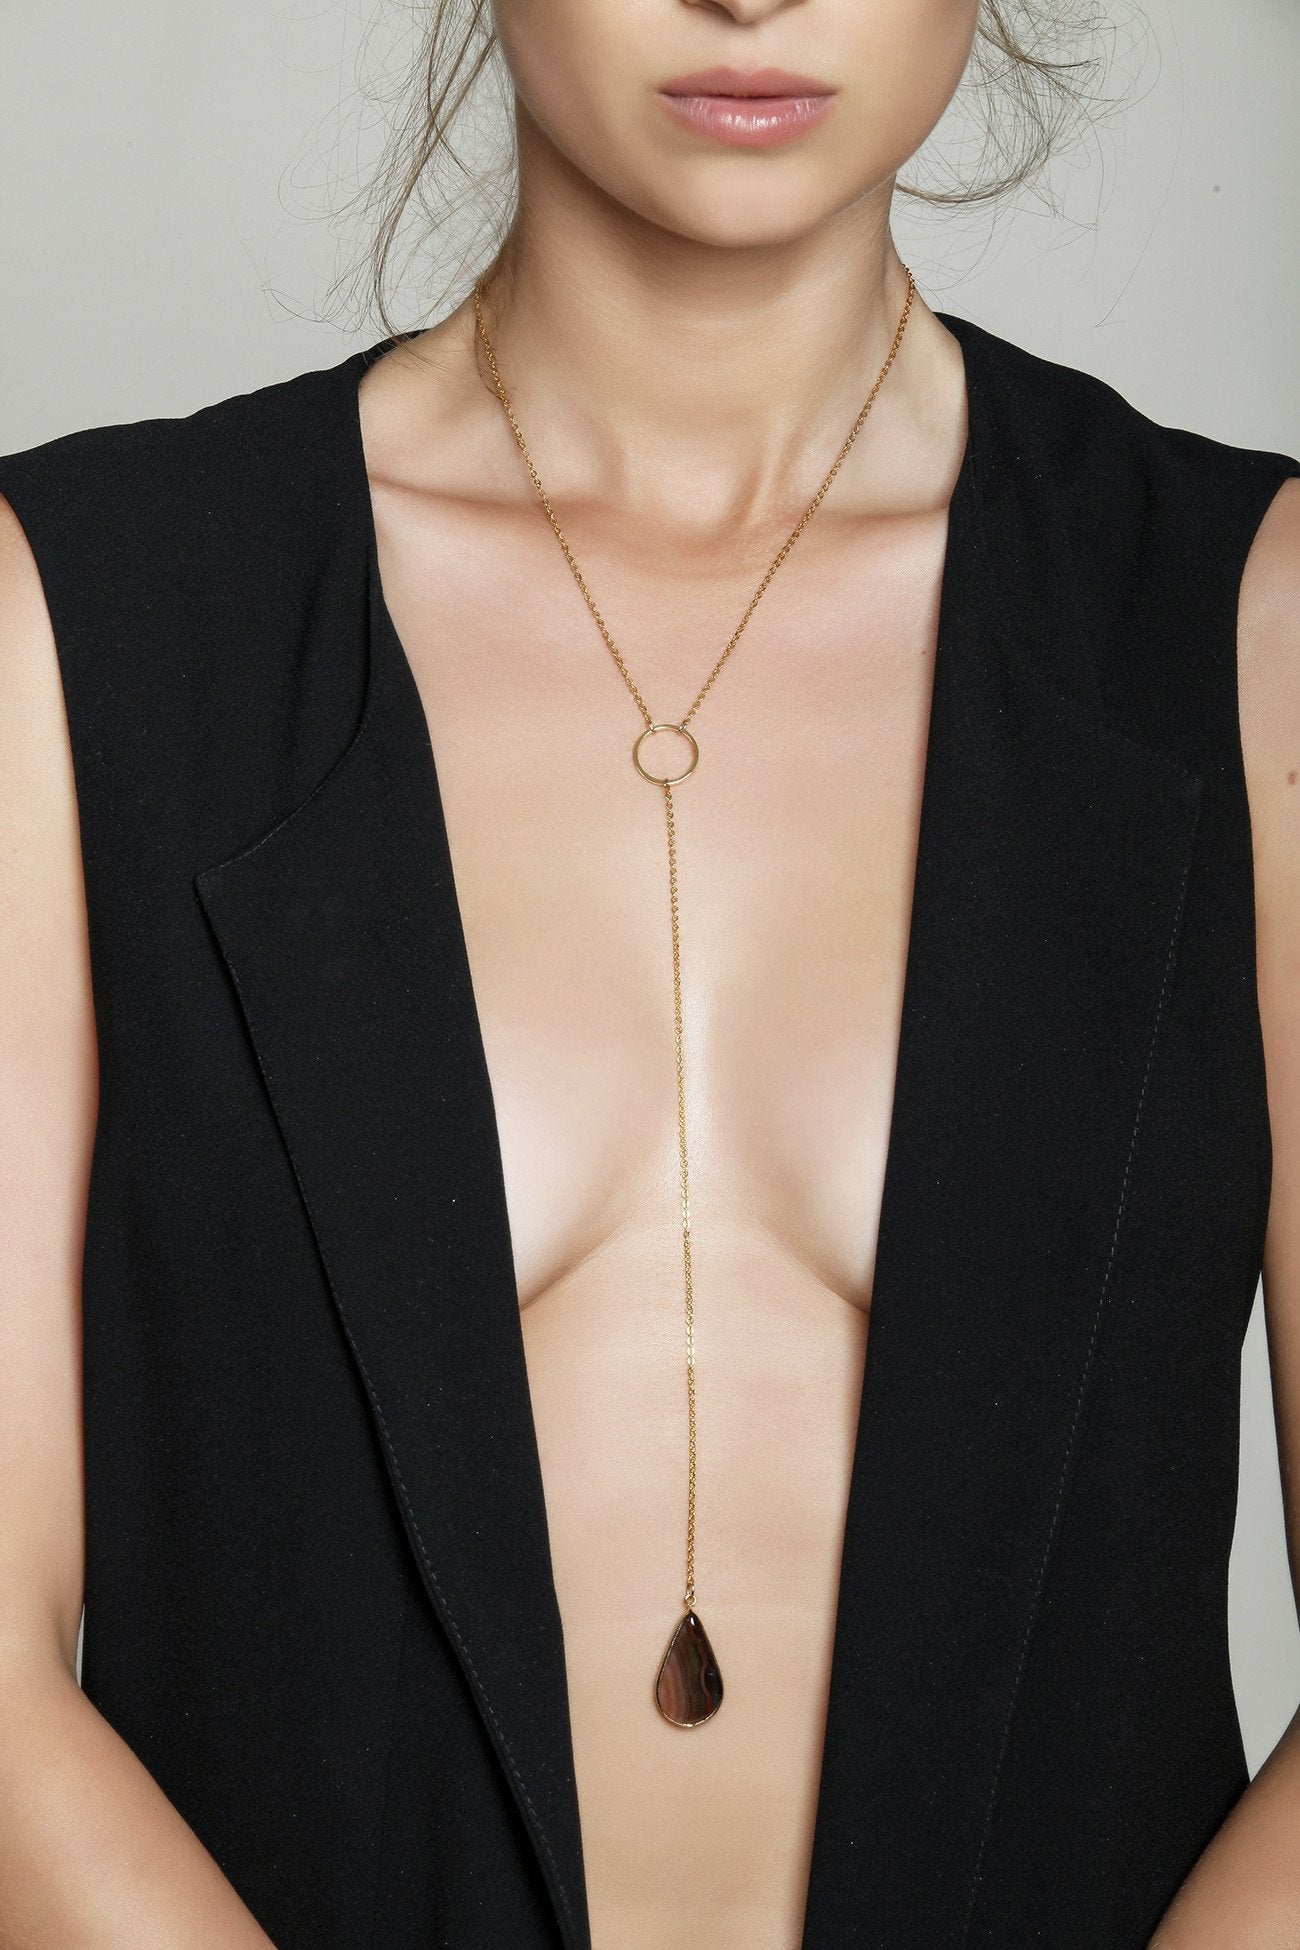 Geometric Lariat Necklace - Boutique Minimaliste has waterproof, durable, elegant and vintage inspired jewelry